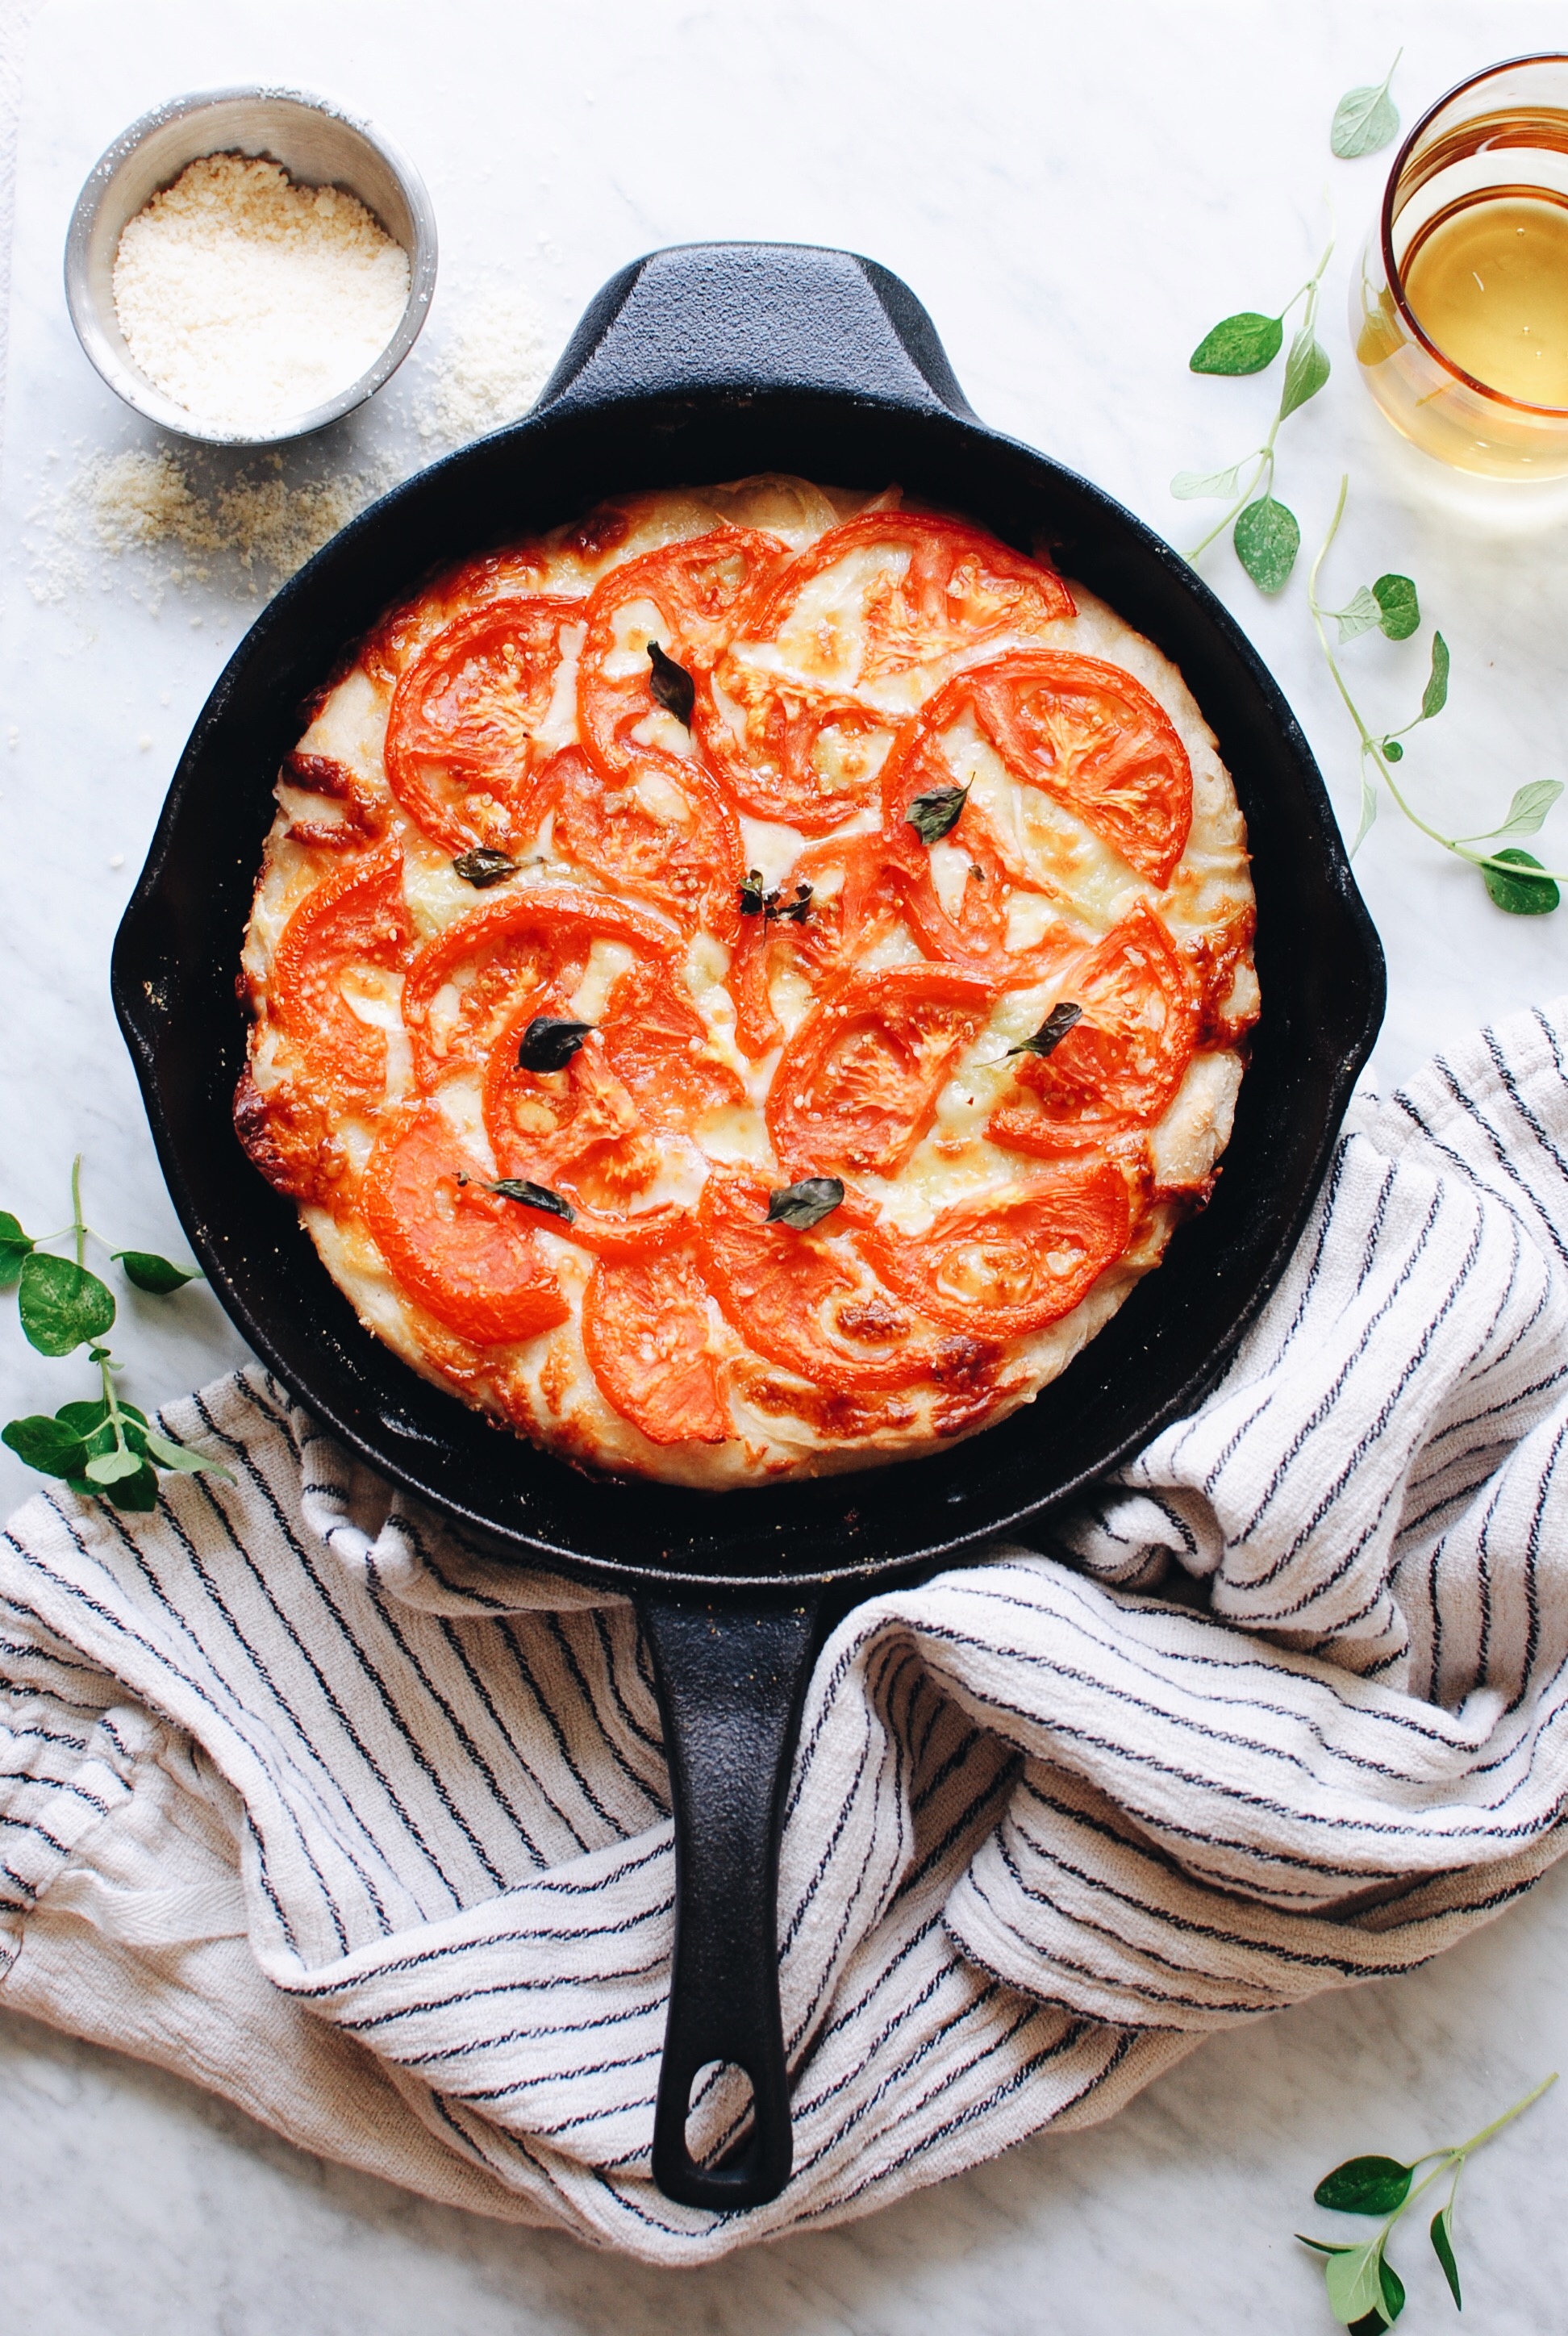 Can You Cook Tomatoes In Cast Iron?